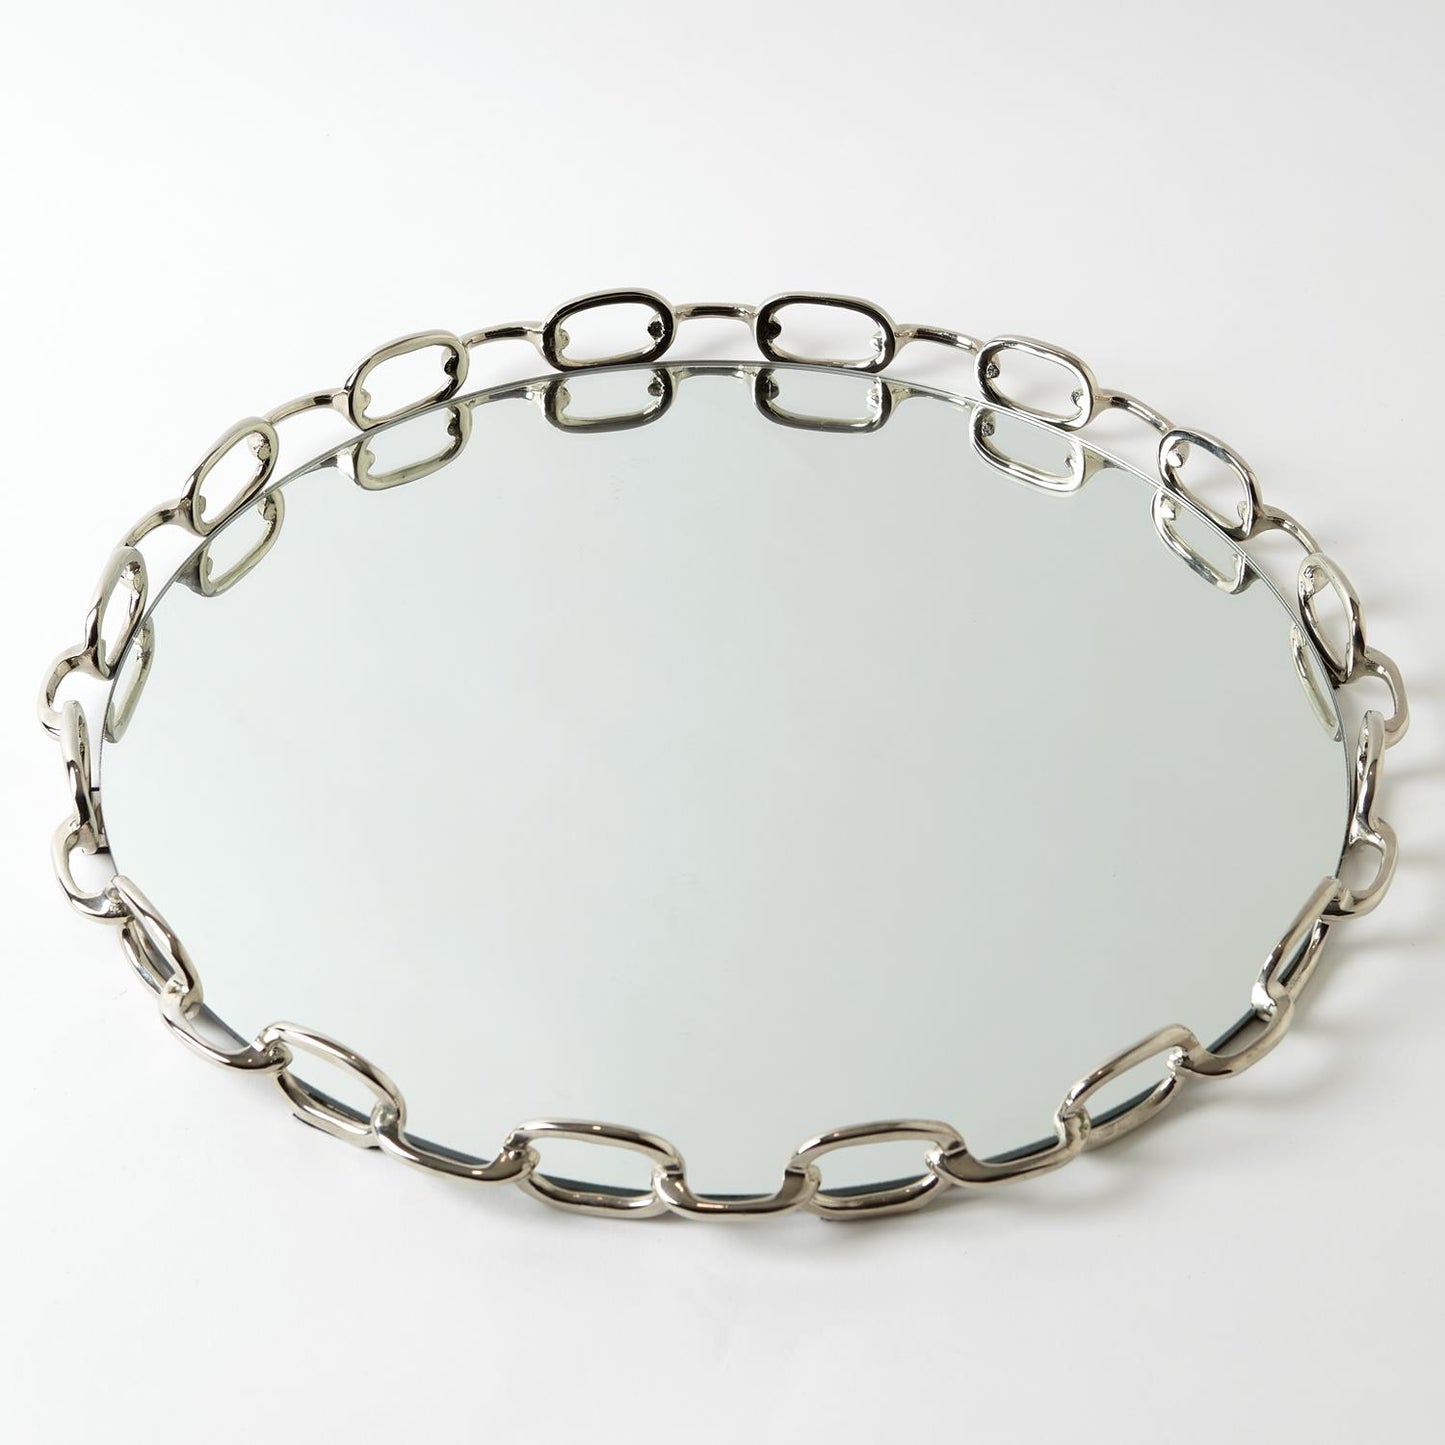 Linked Mirrored Tray - Nickel